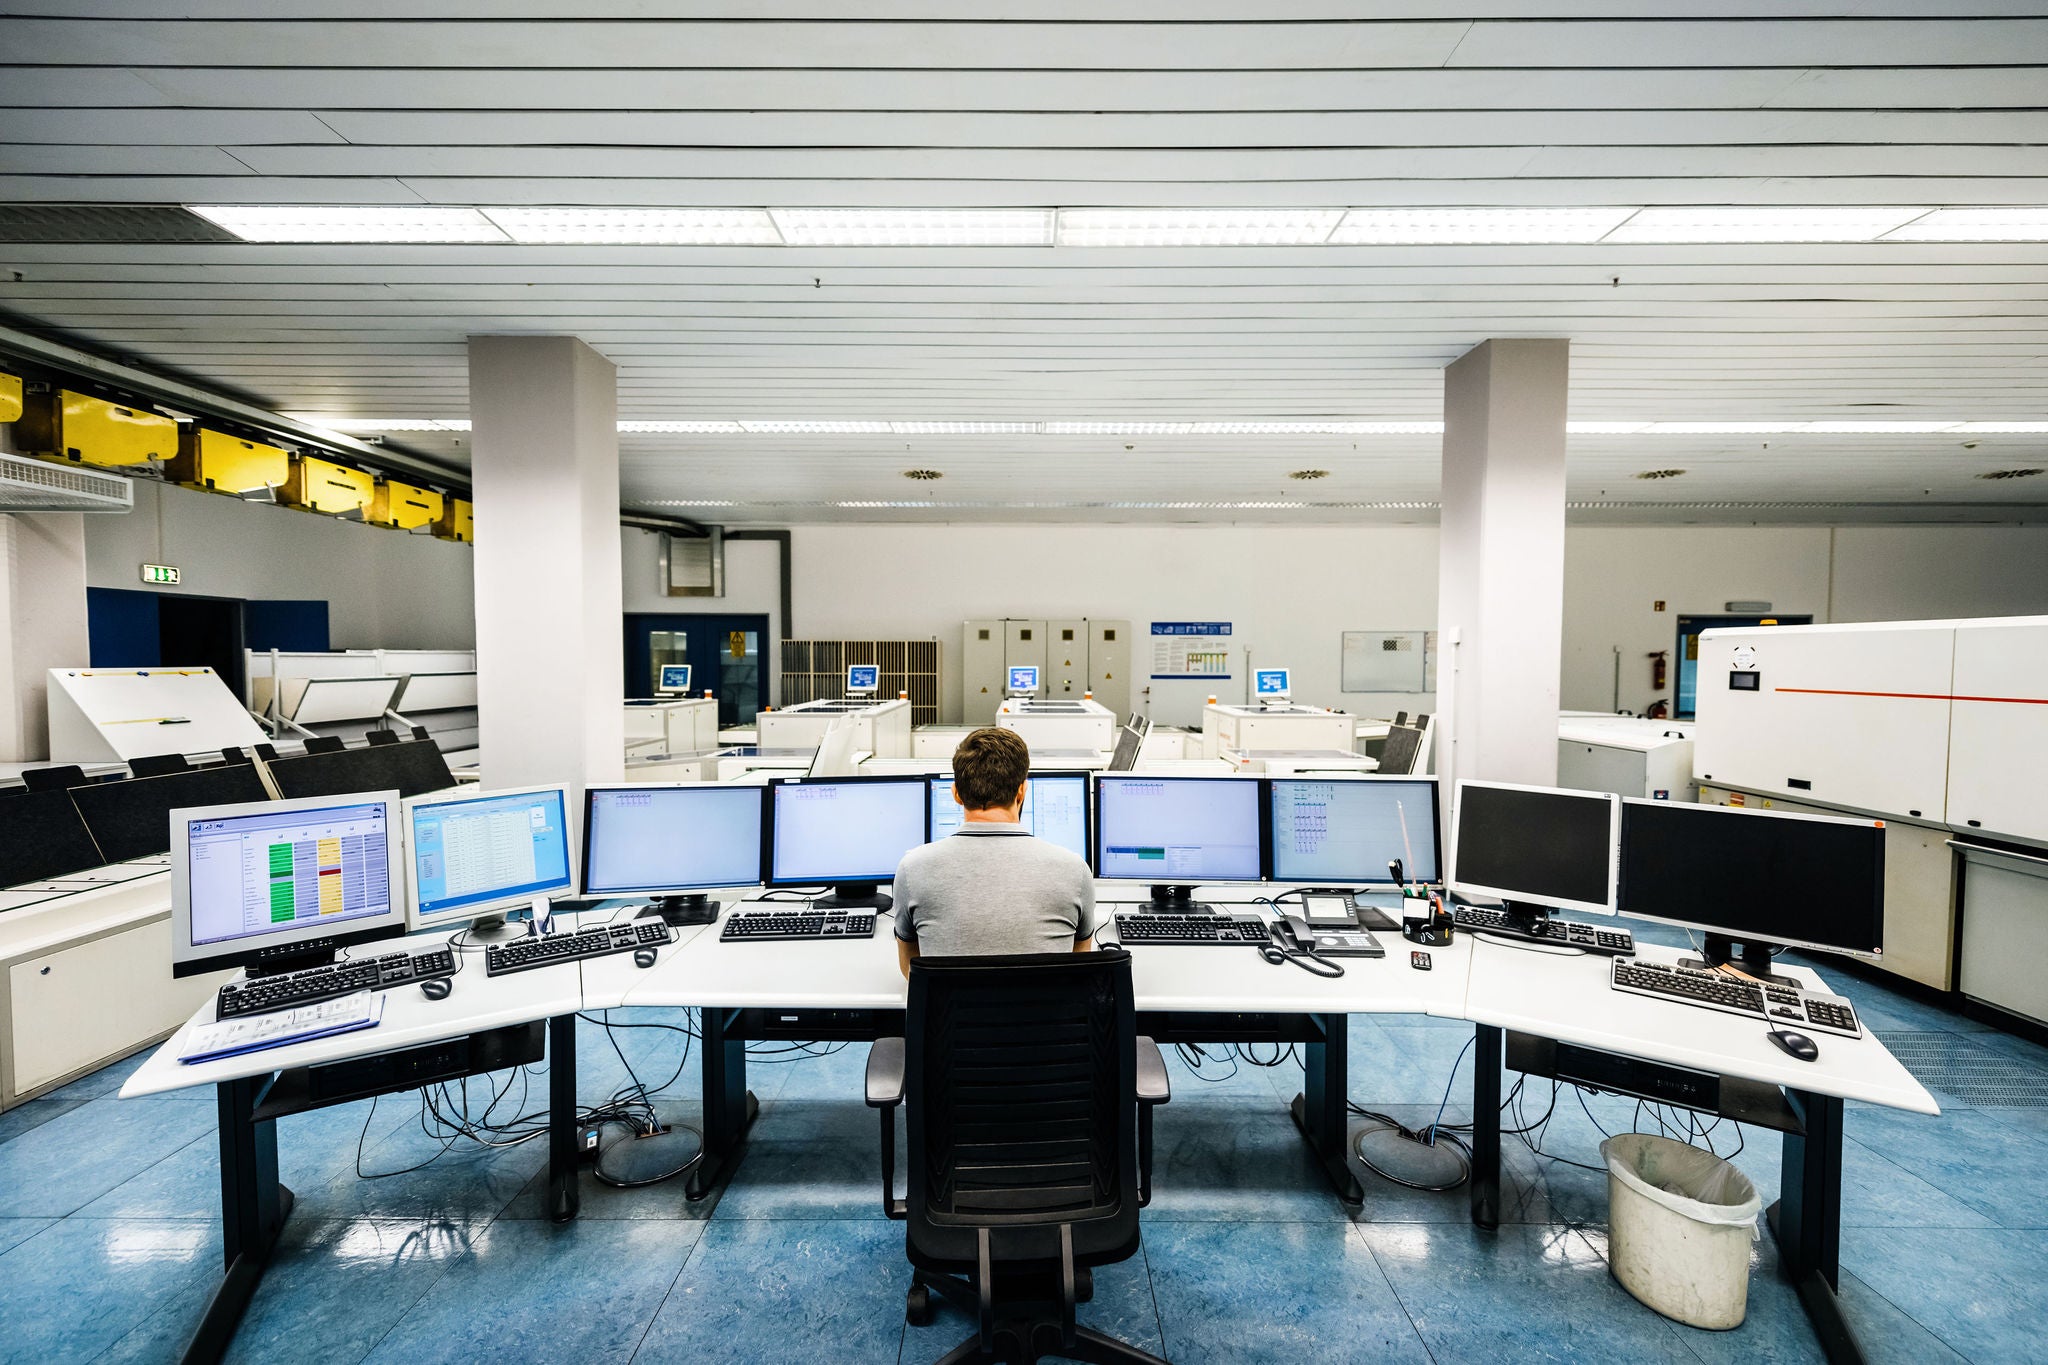 Back shot of an engineer sitting on a desk and working on computers in a large clean control room of a modern printery